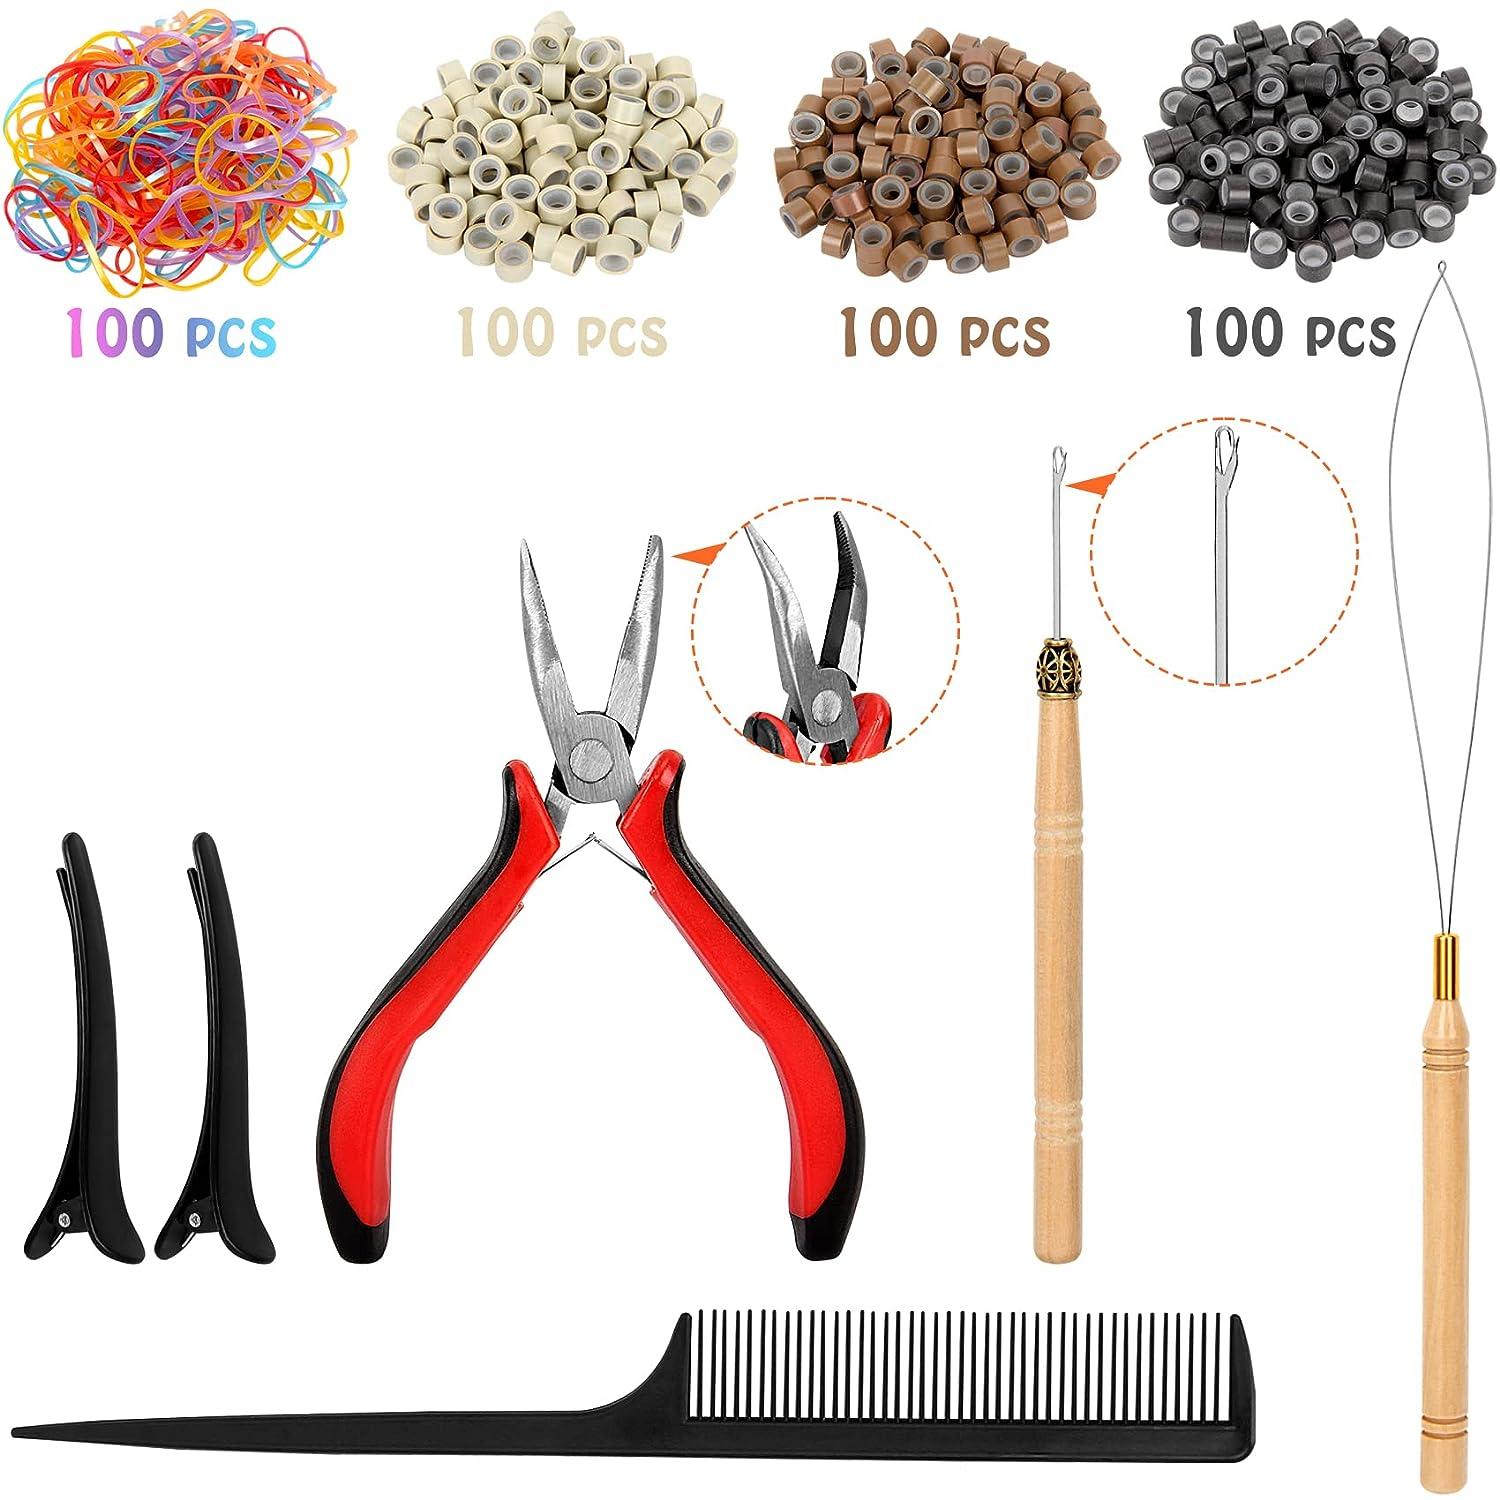 12 Color 48Inch Hair Tinsel Kit, 3200 Stands Halloween Christmas Glitter Sparkle Hair Extensions, Human Hair Extensions with Pliers Clips Hooks